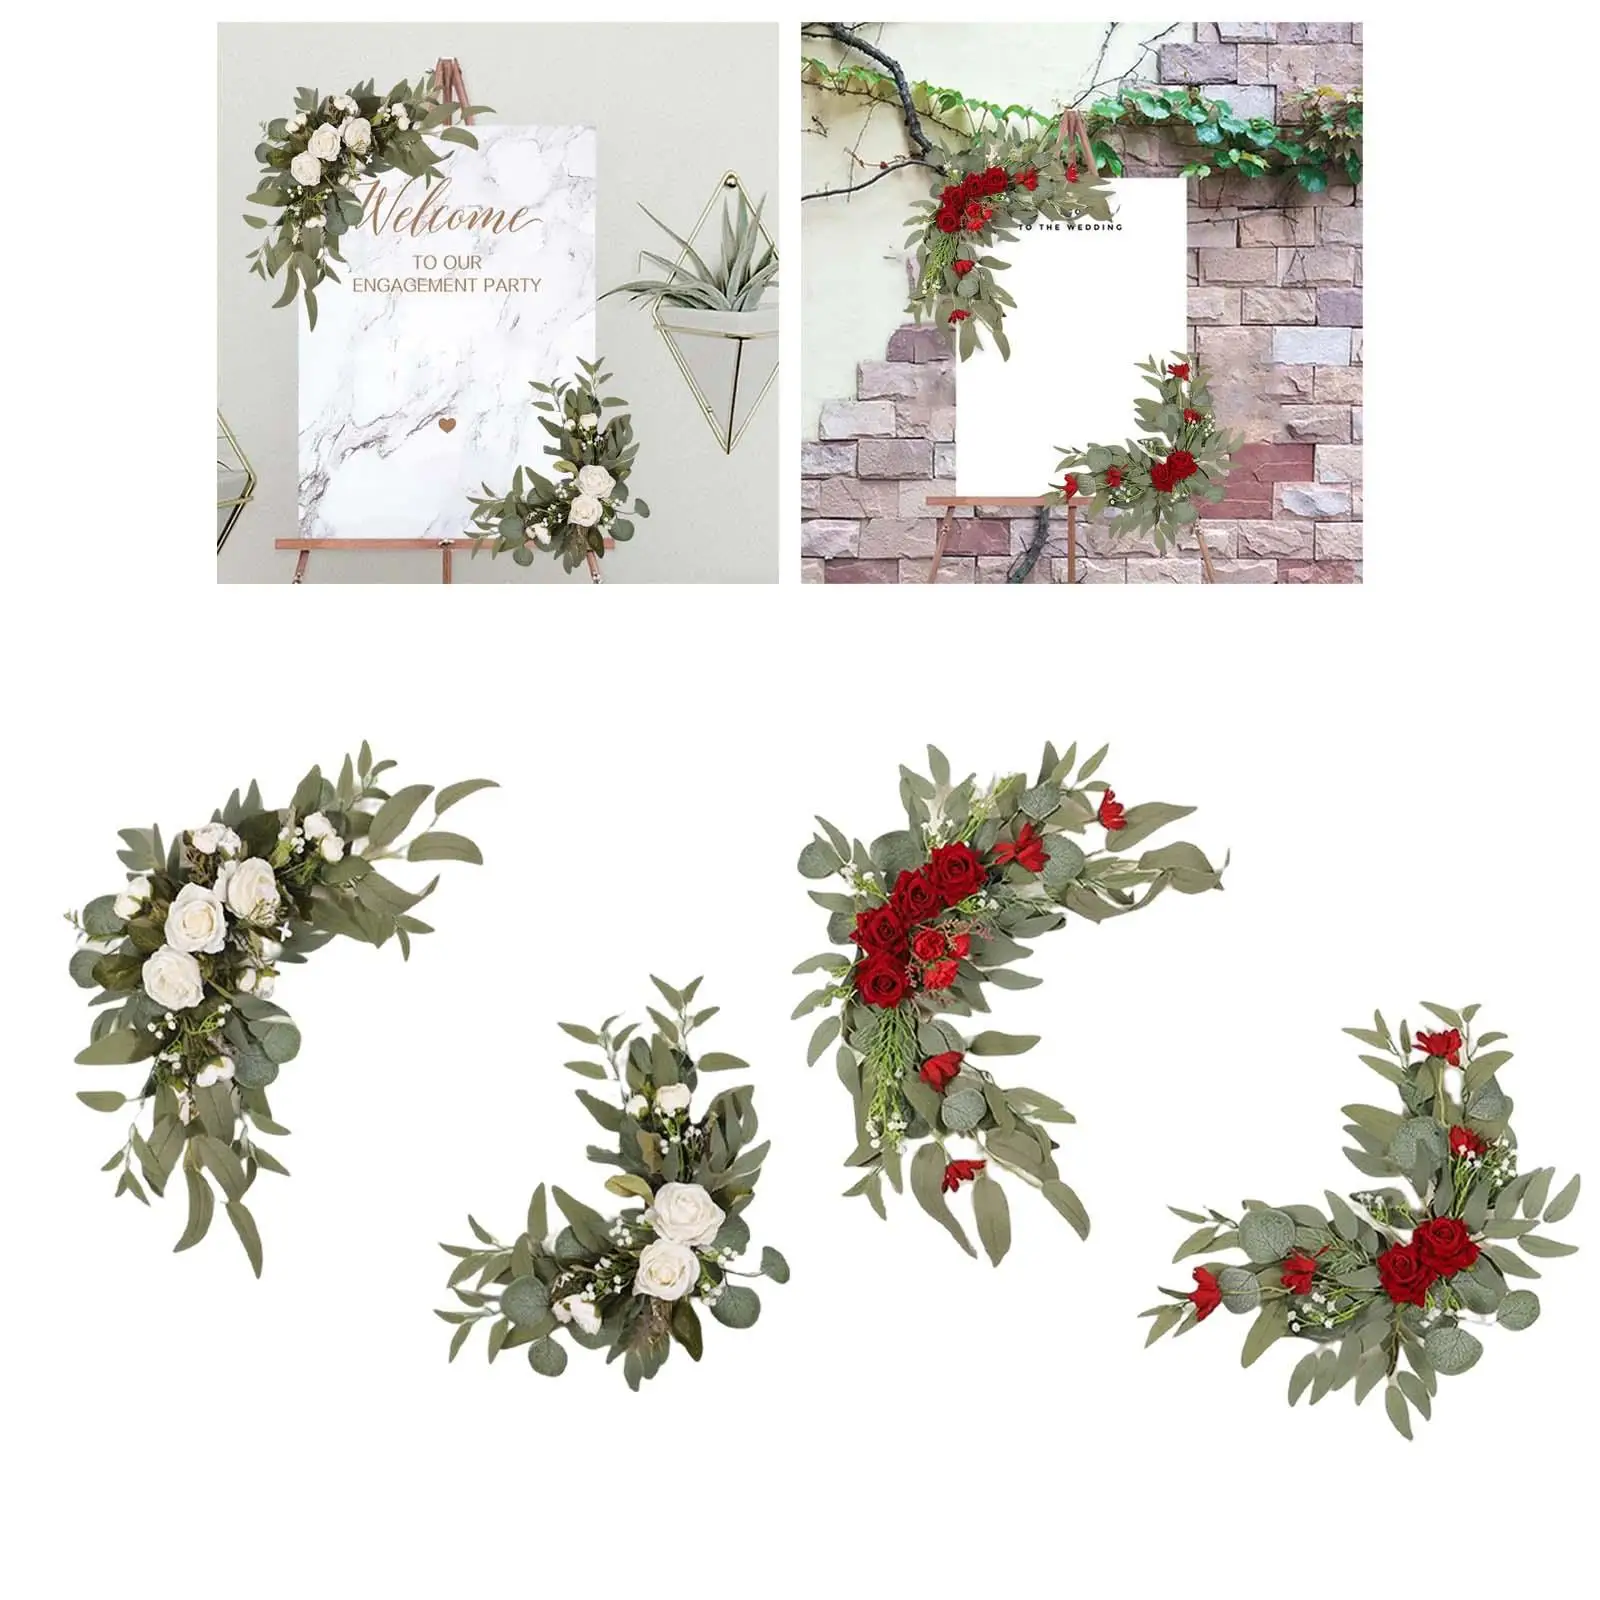 2 Pieces Rustic Artificial Flower Swag Rose and Gypsophila Decorative Wedding Arch Flowers for Wedding Arbor Front Door Decor